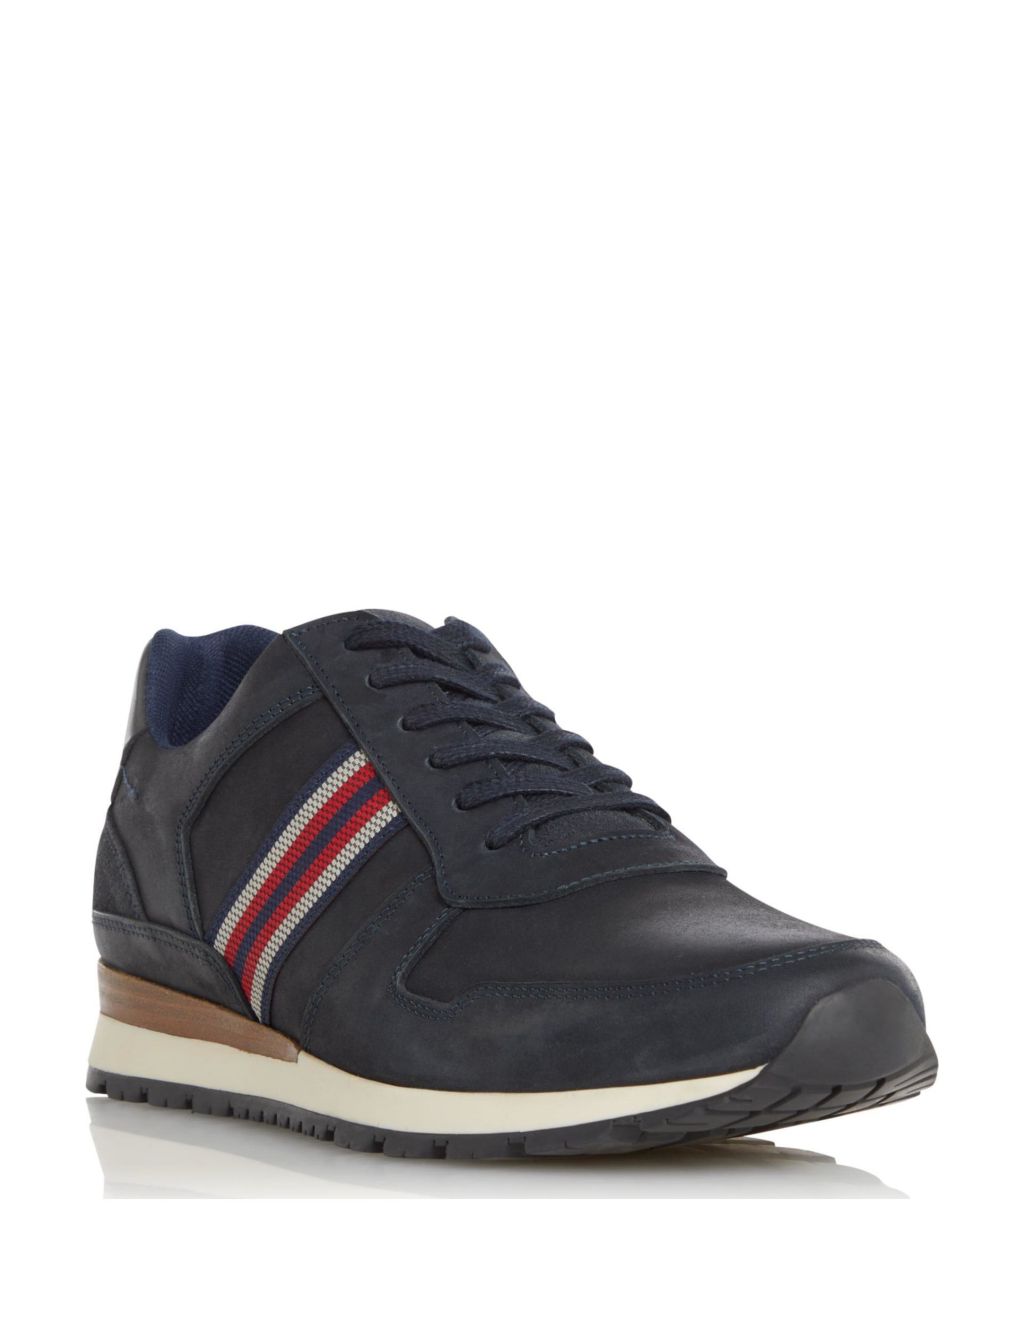 Leather Lace Up Side Stripe Trainers image 2